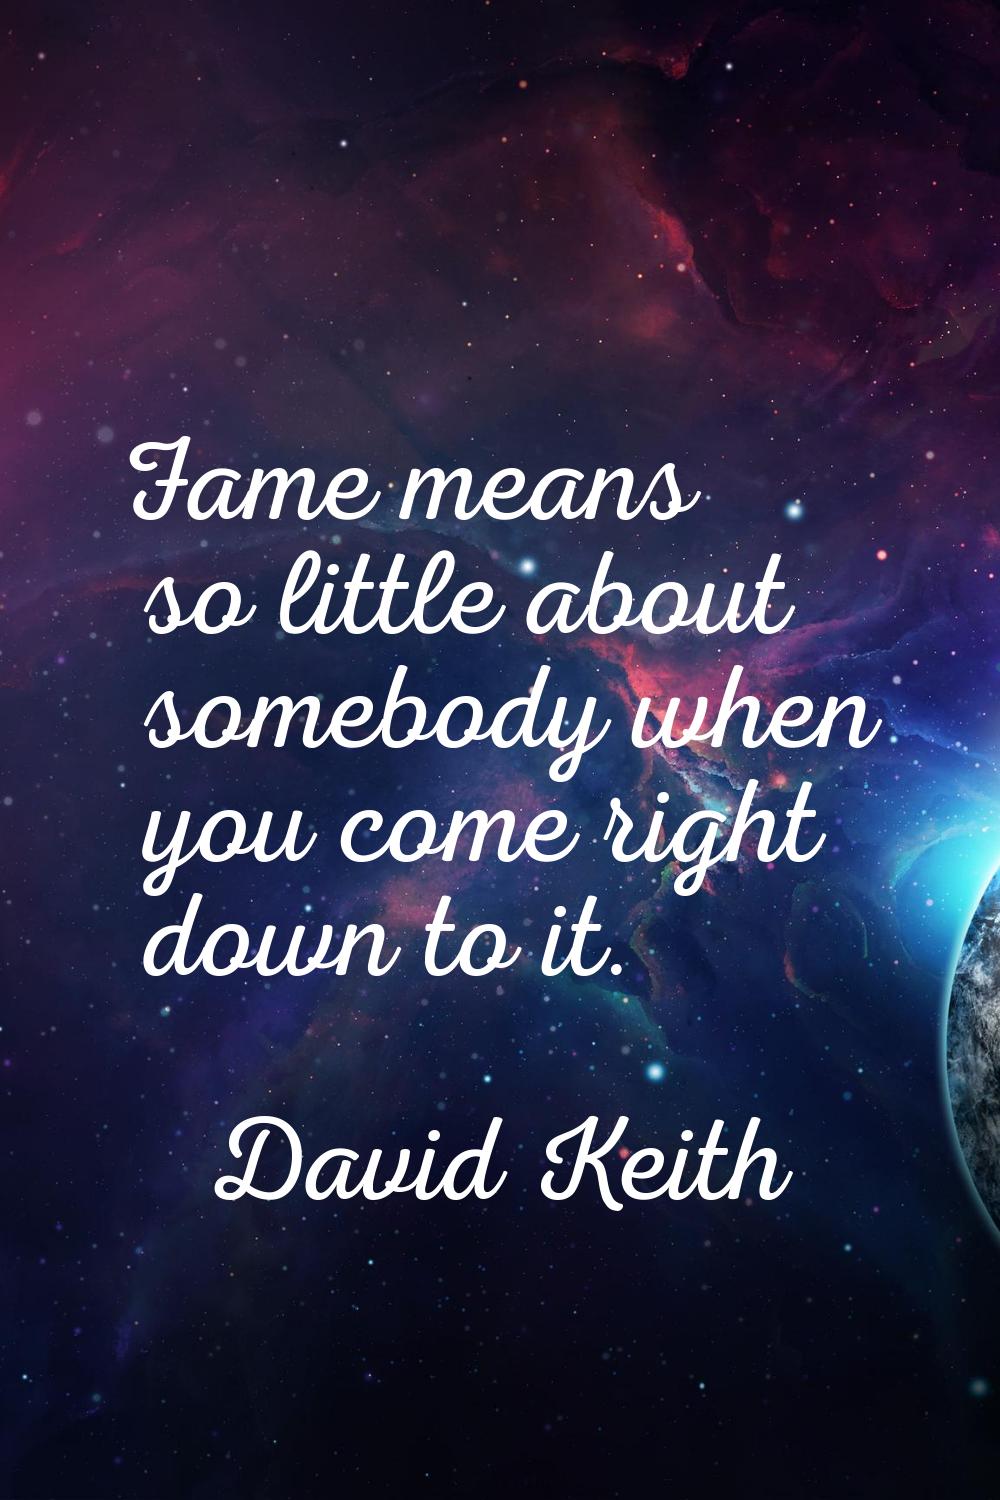 Fame means so little about somebody when you come right down to it.